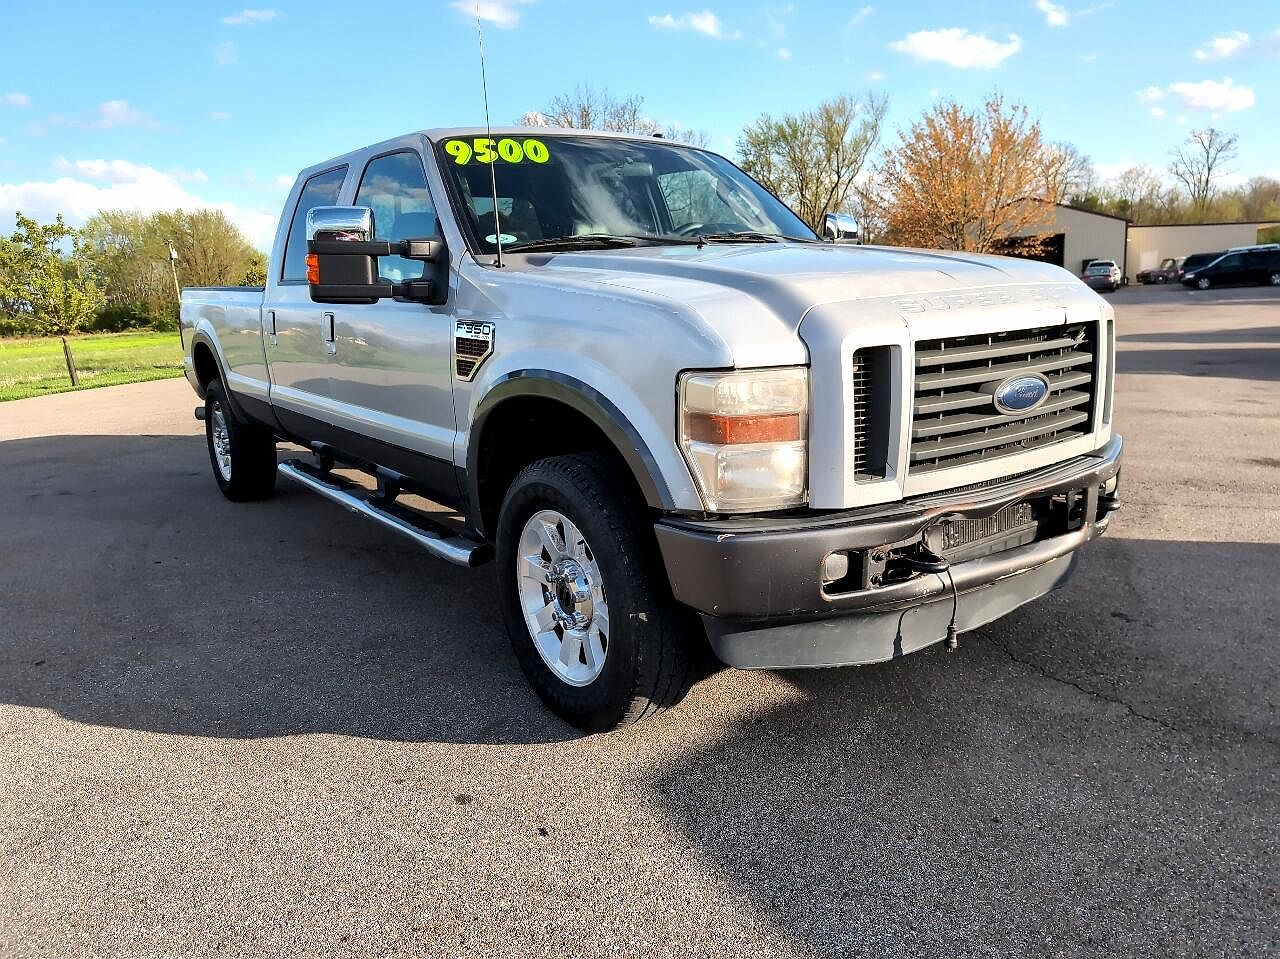 2008 Ford F-350 null image 2